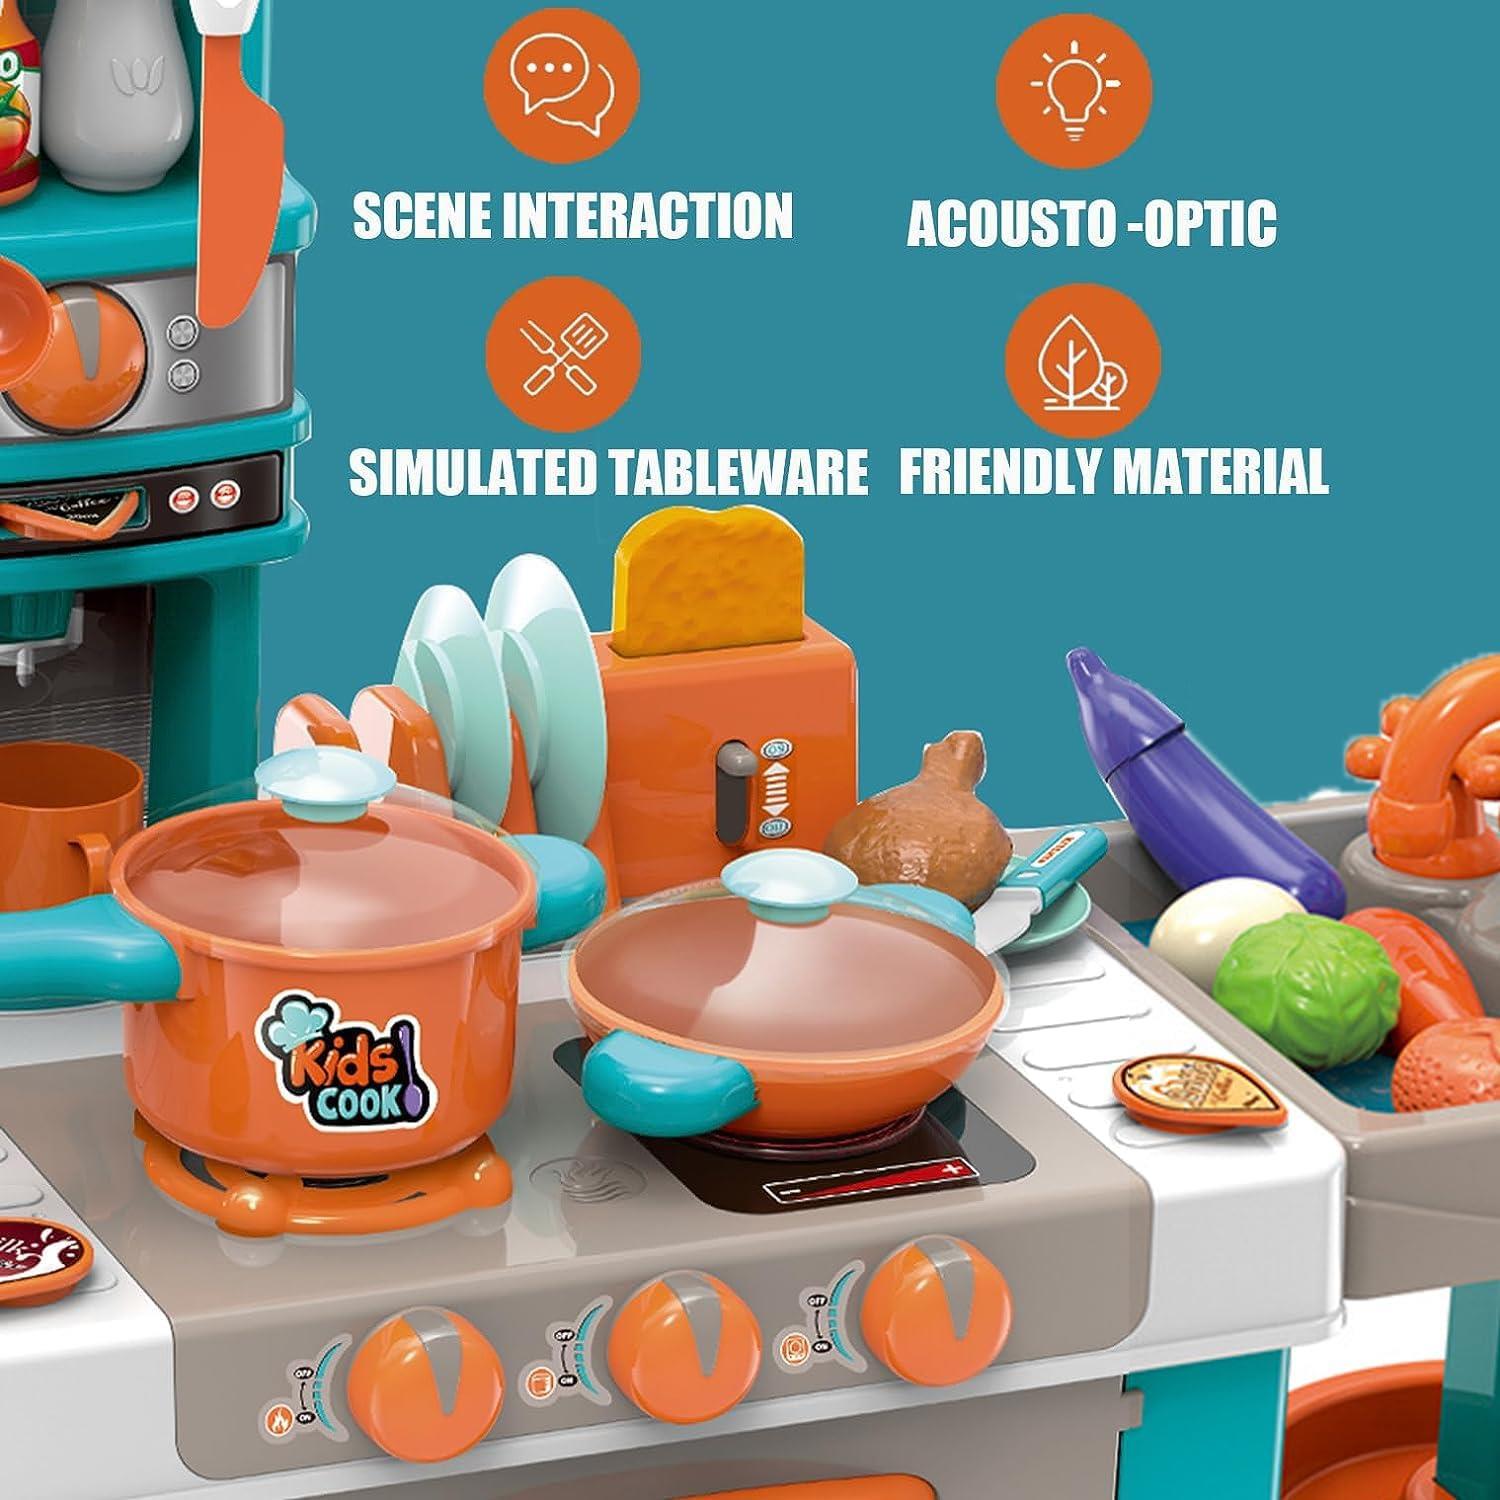 Kids Kitchen Play Set with Cookware Play Food and Accessories by The Magic Toy Shop - The Magic Toy Shop